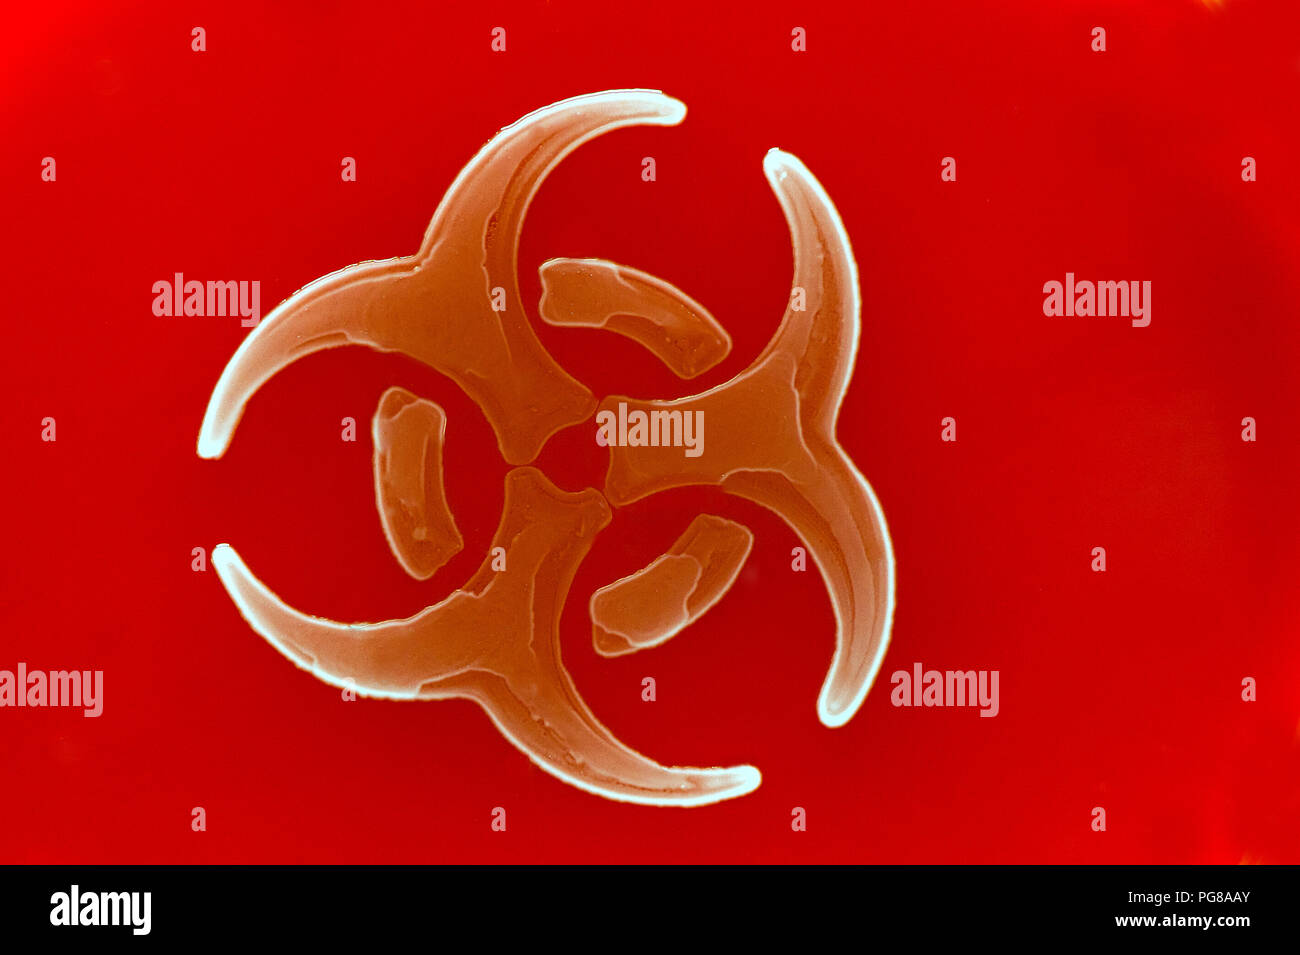 glowing biohazard symbol consisting of bacterial culture against red background Stock Photo